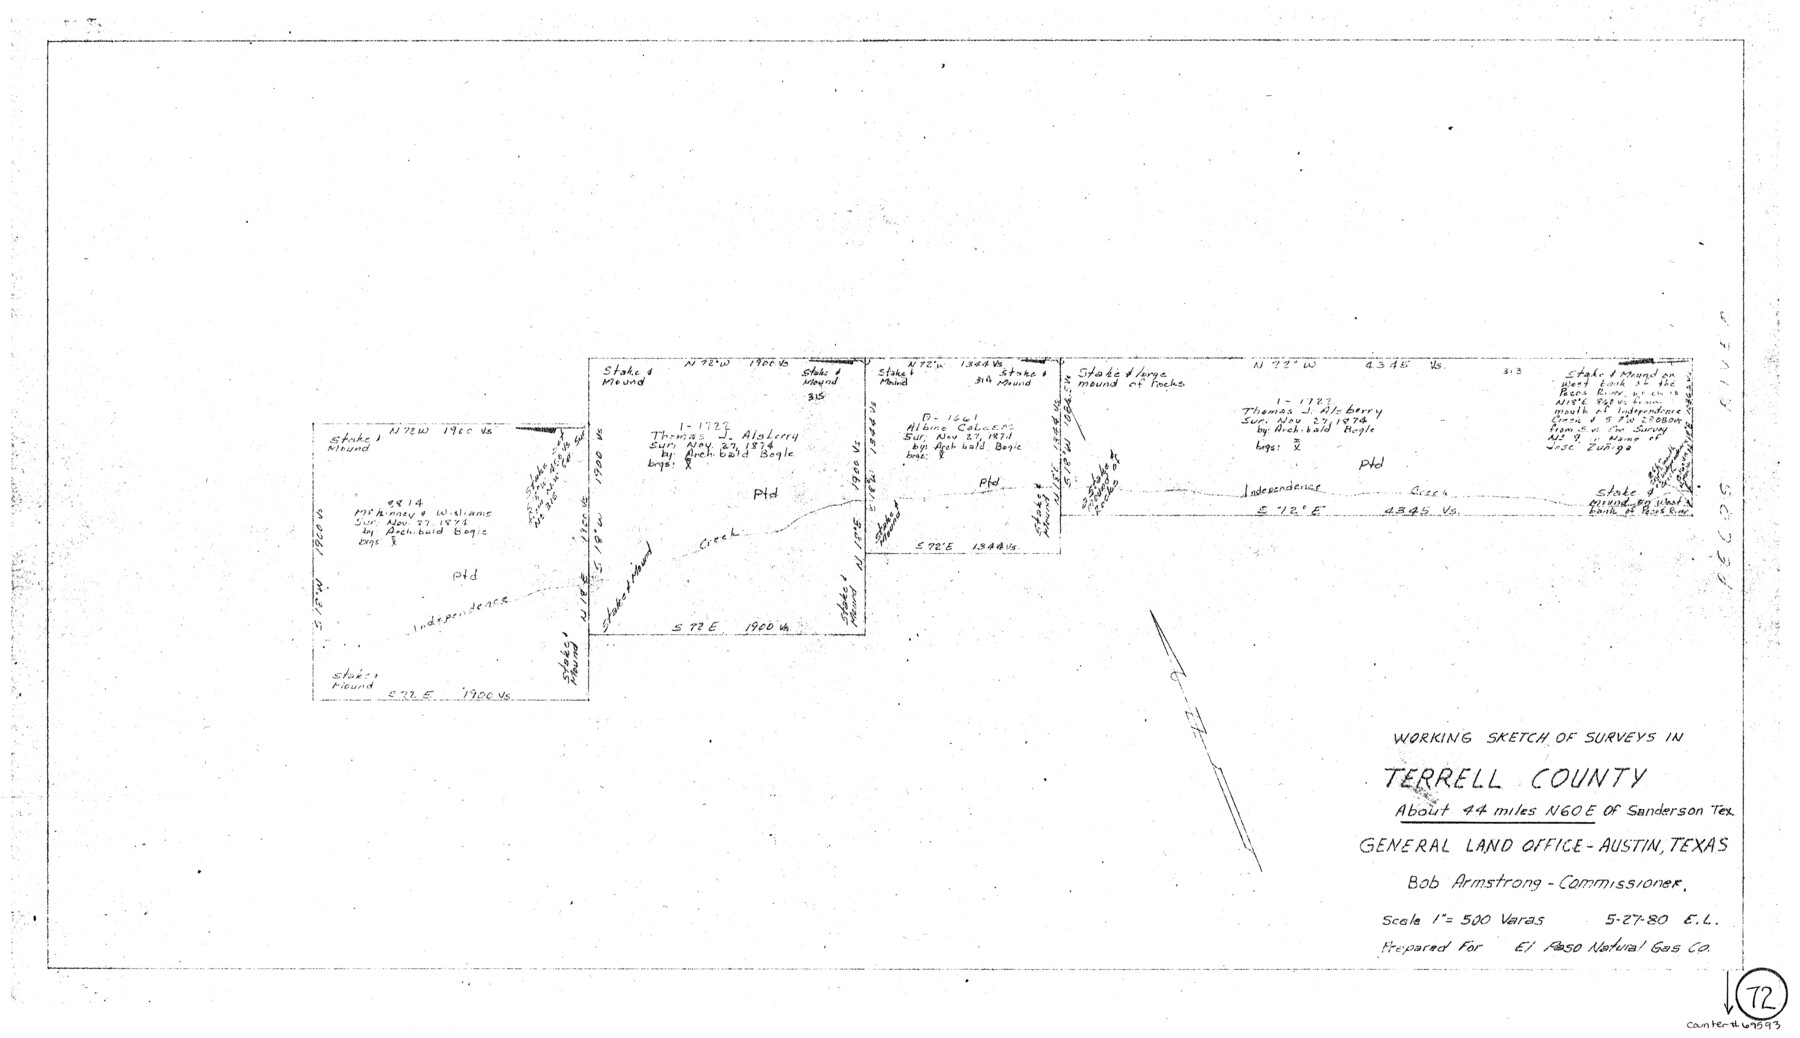 69593, Terrell County Working Sketch 72, General Map Collection